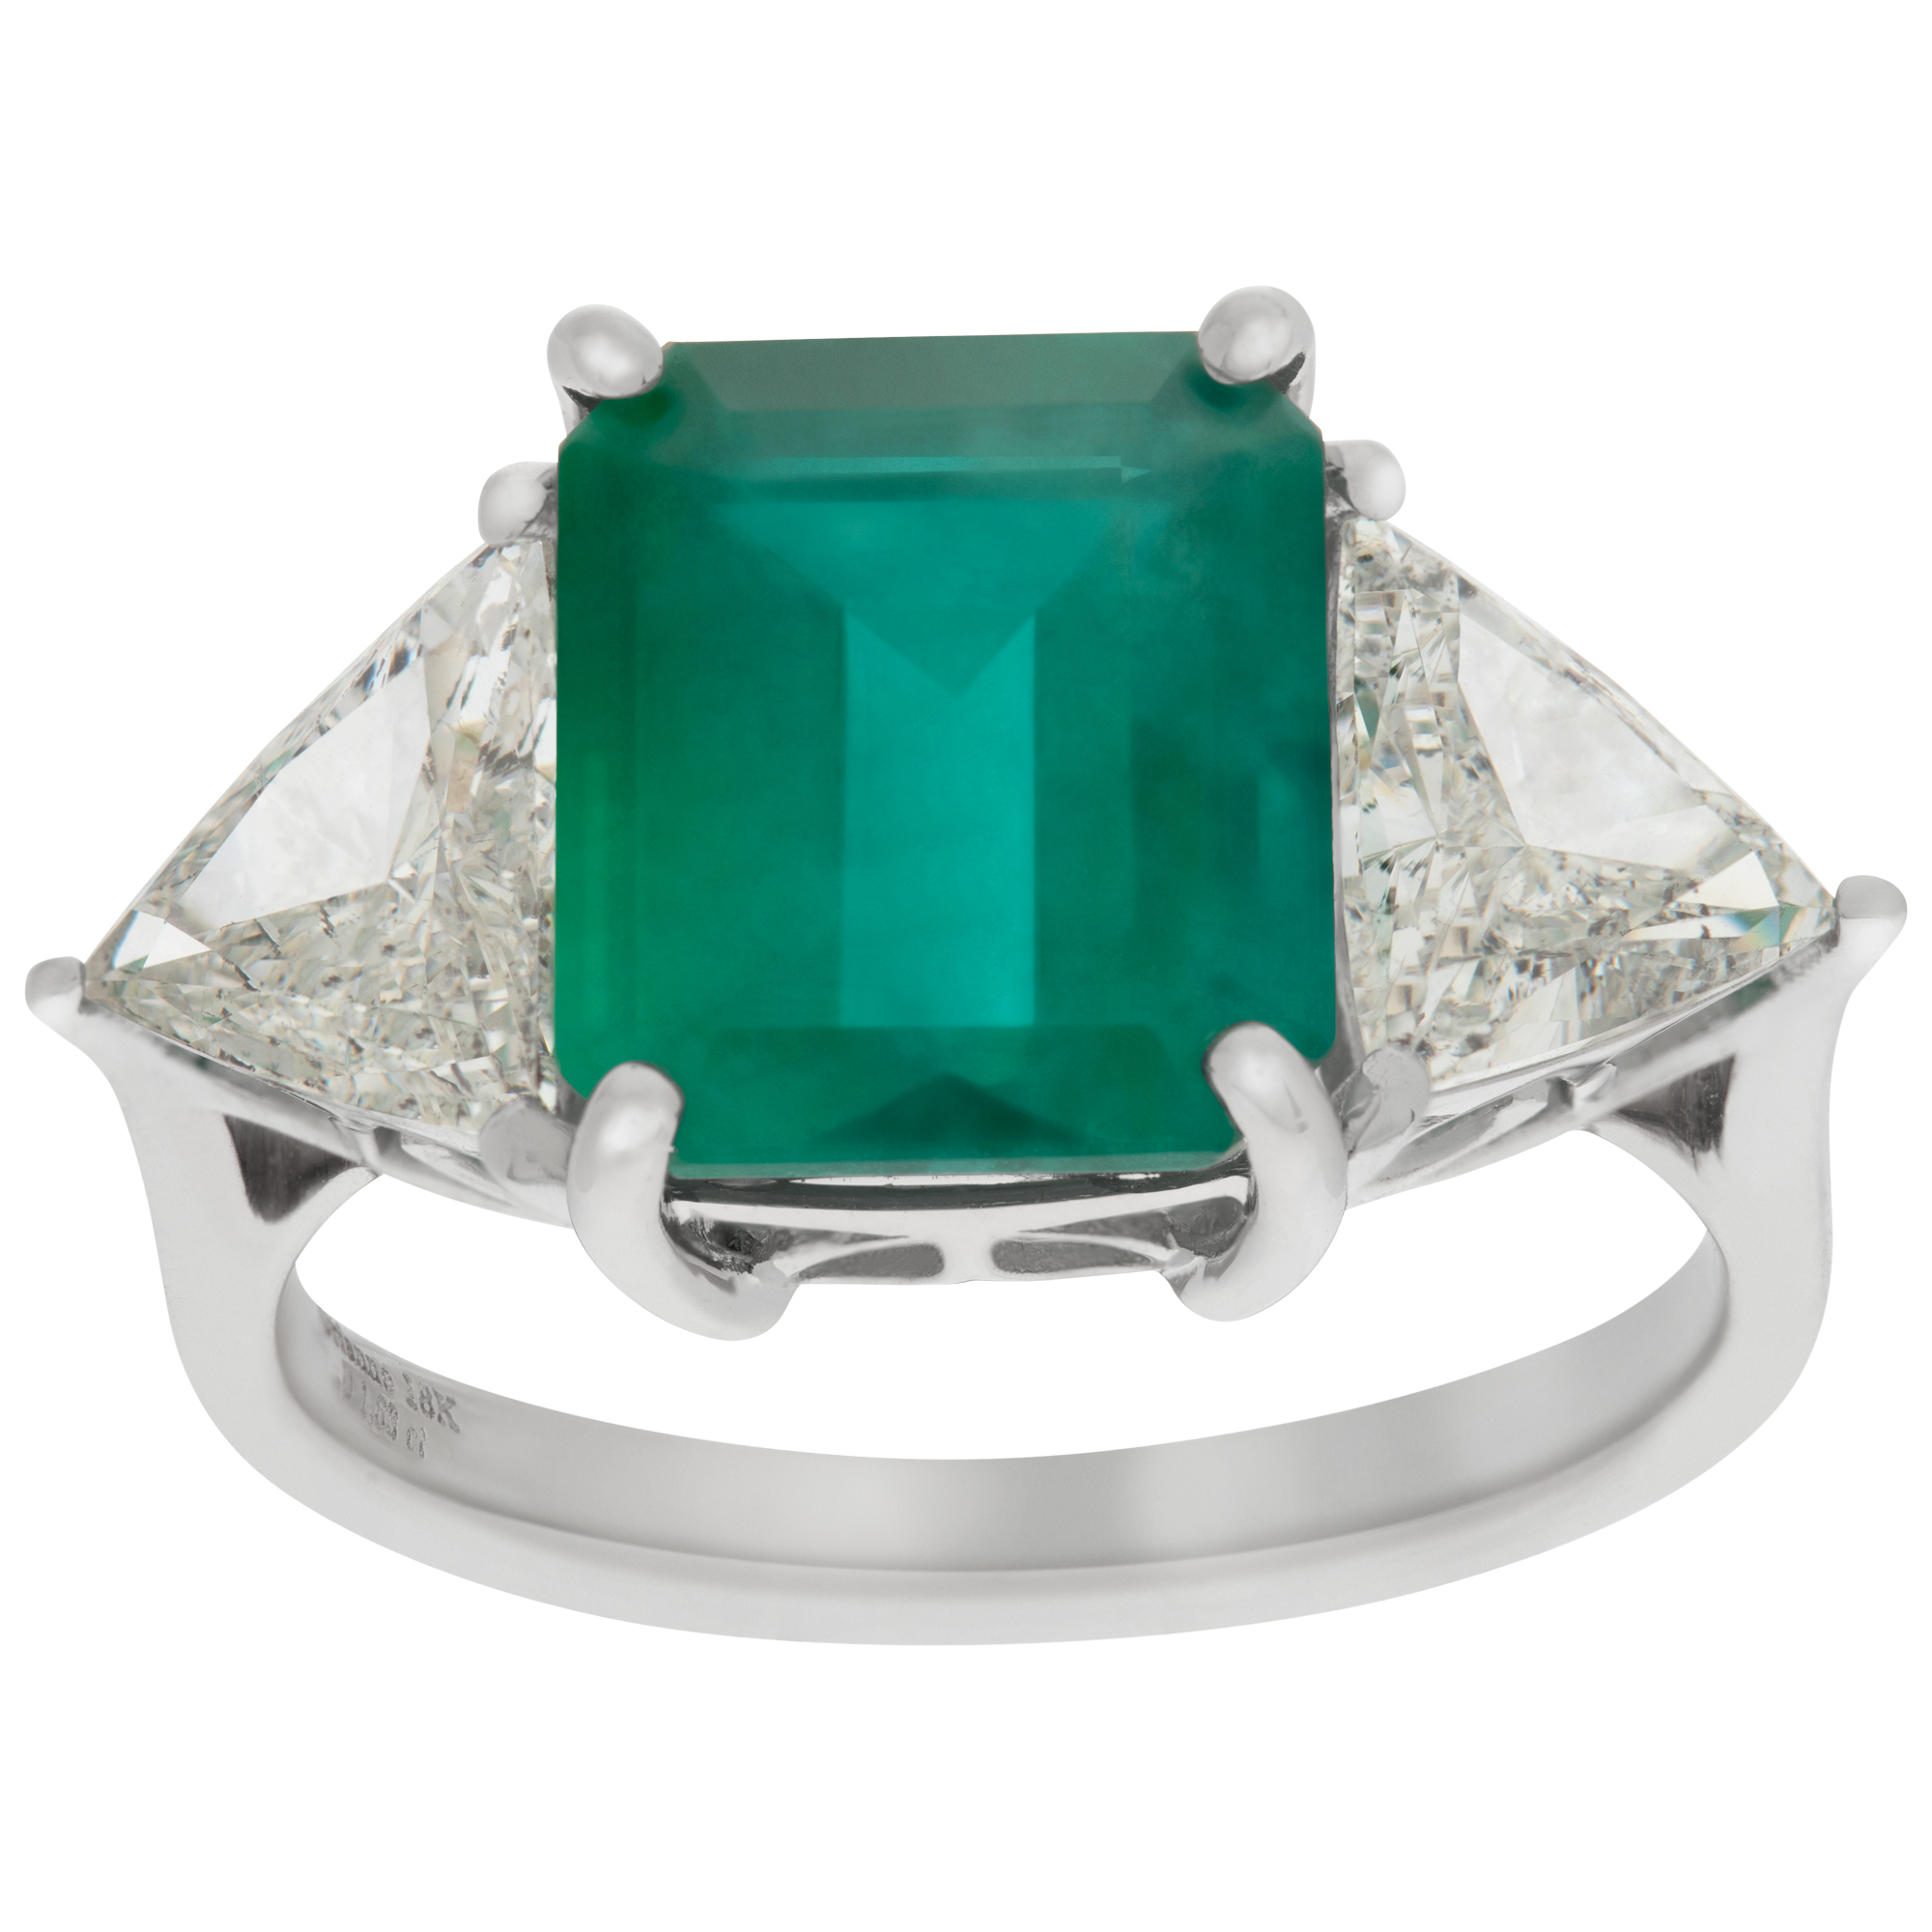 GIA certified emerald ring with diamond accents in 18k white gold